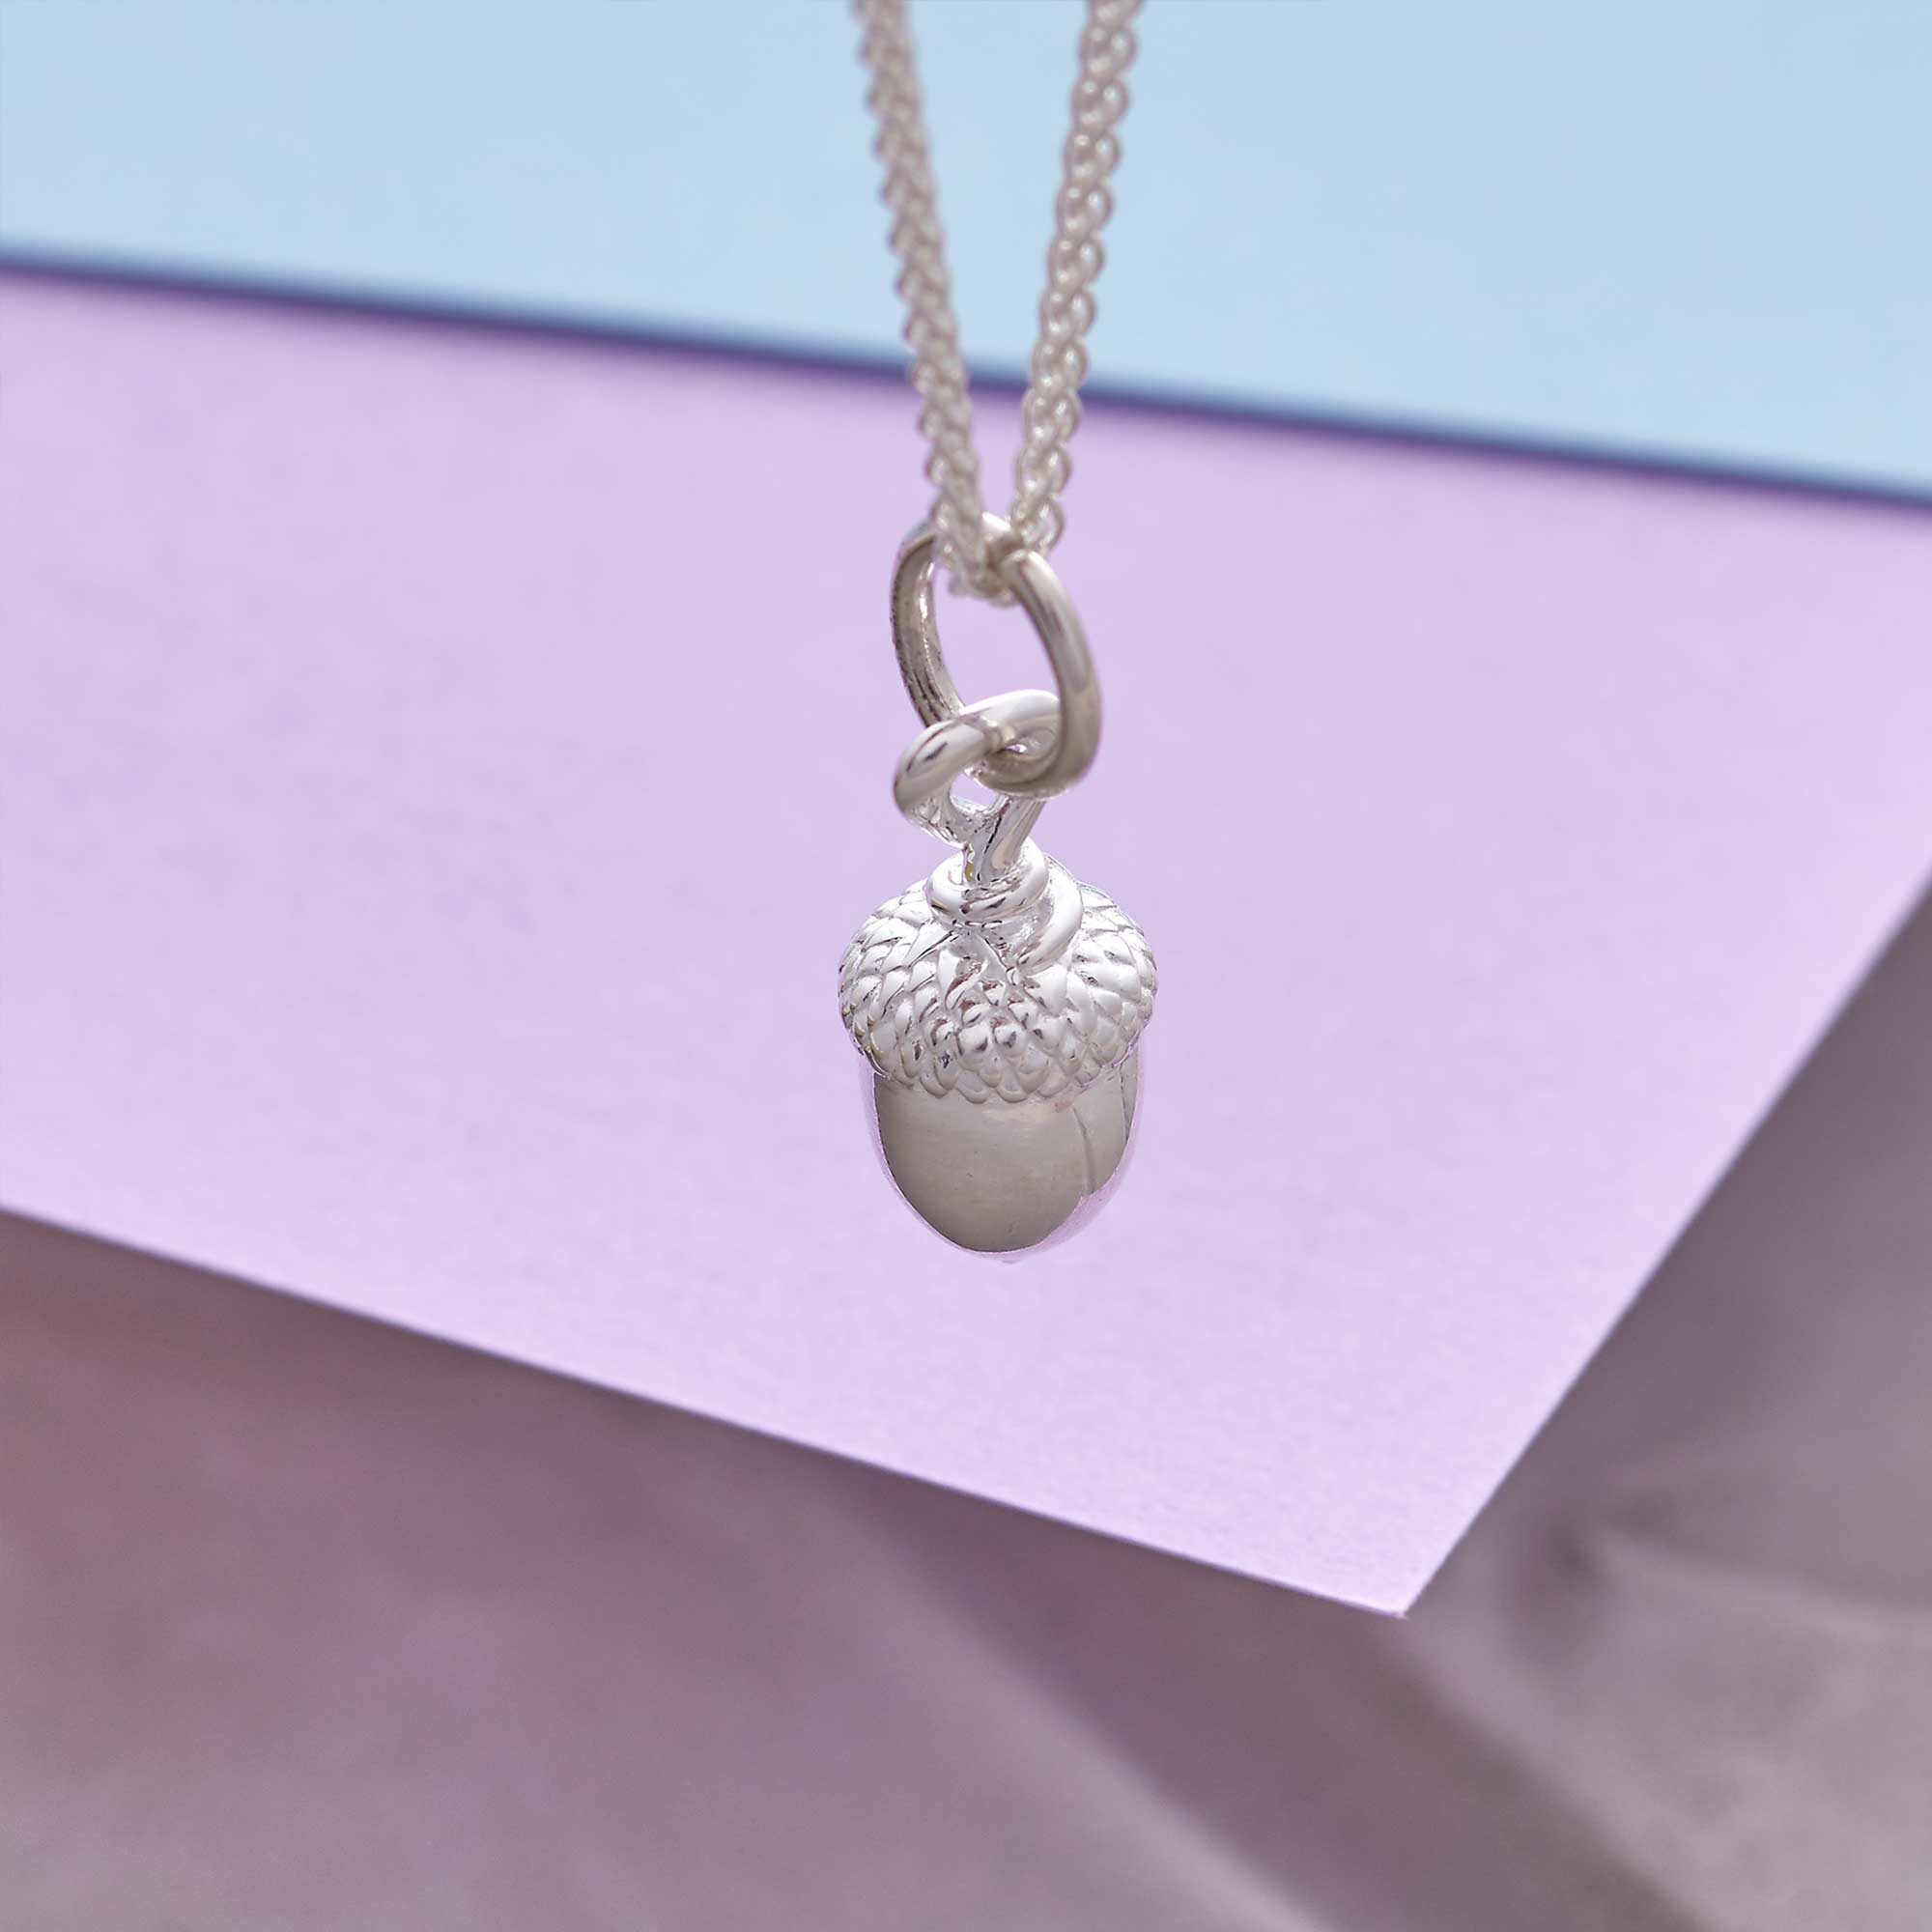 Nature's Strength in Silver - Acorn Necklace by Scarlett Jewellery